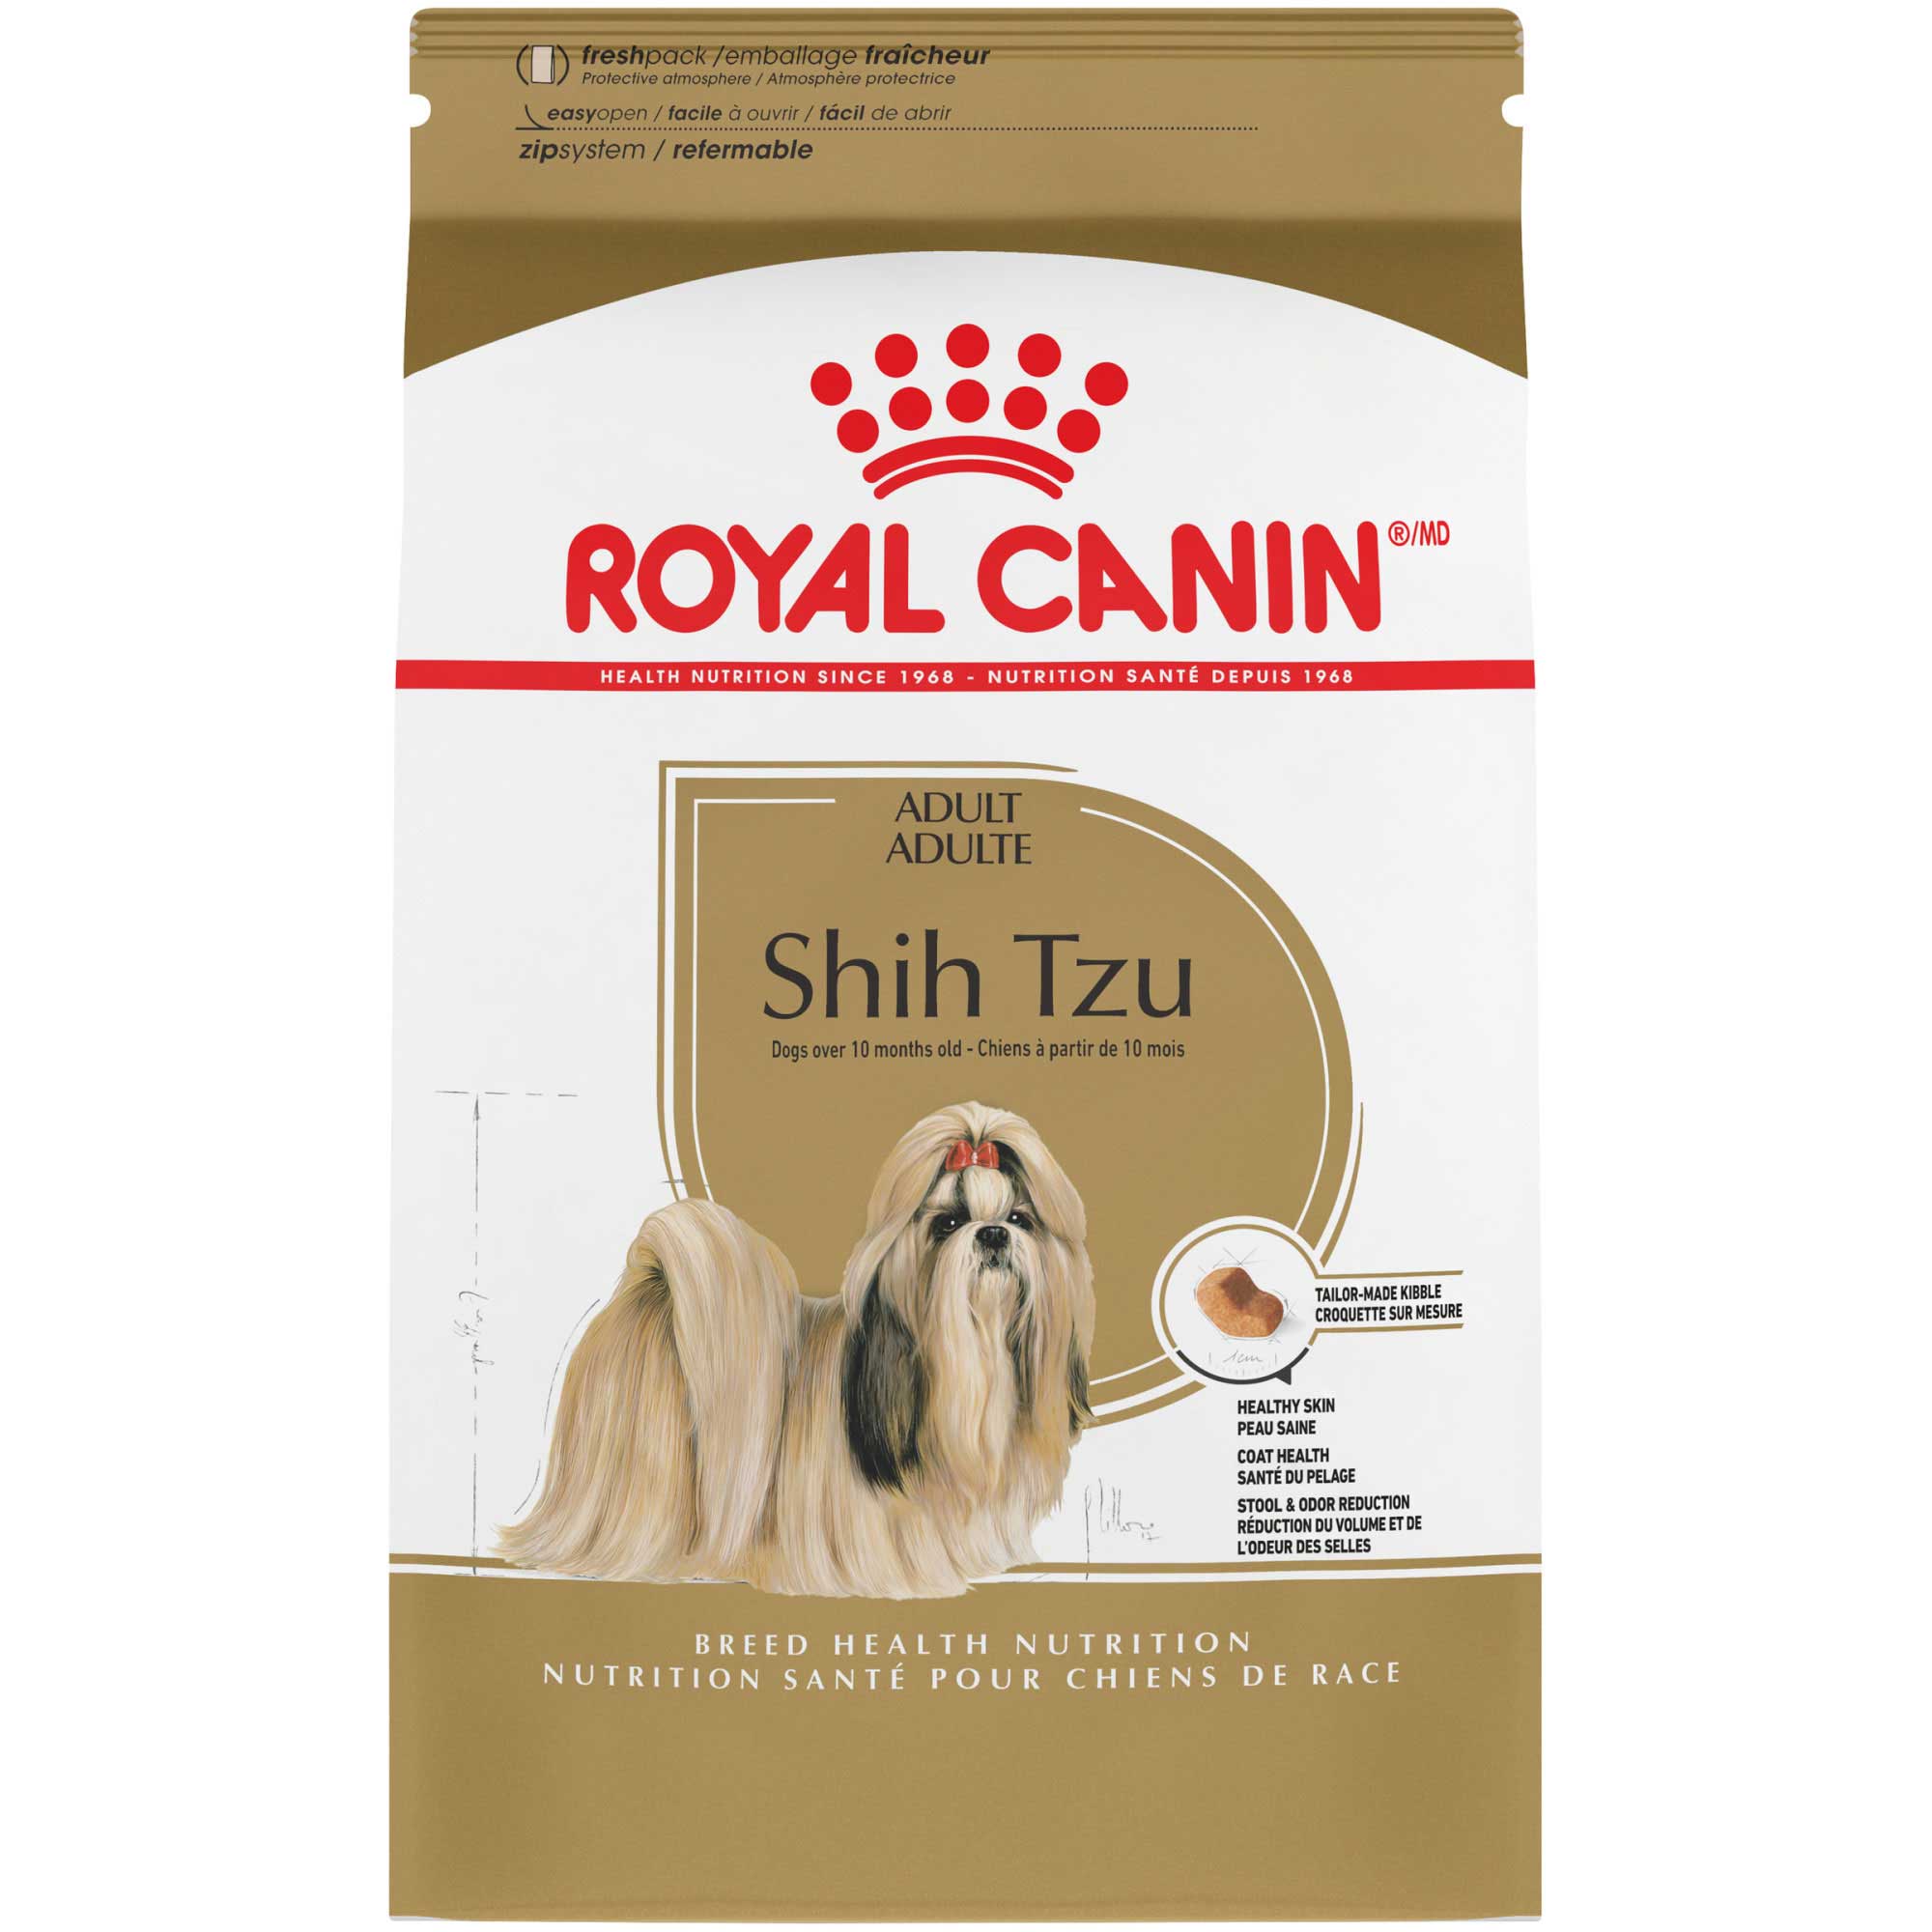 Royal Canin Shih Tzu Adult Breed Specific Dry Dog Food, 10 Pounds